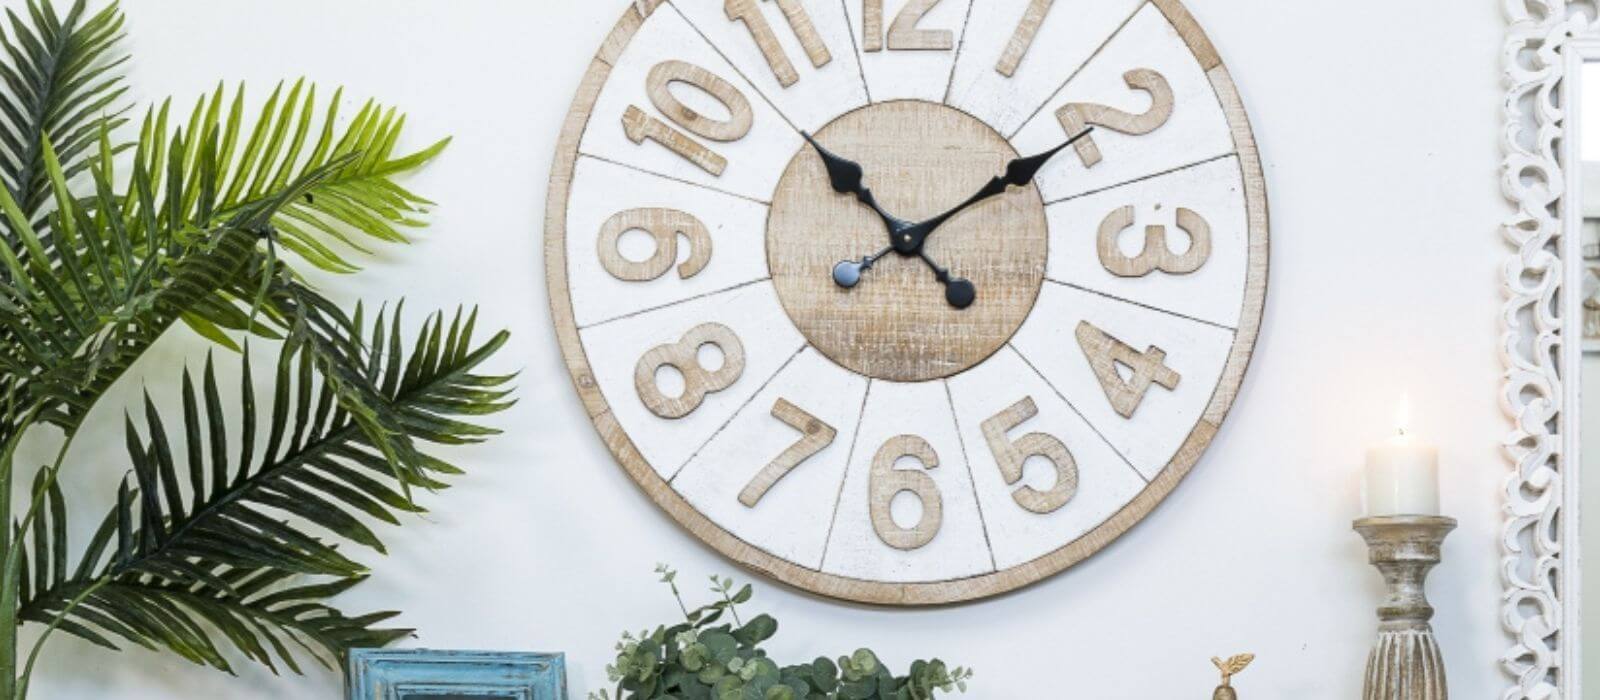 How to choose a wall clock for your home - Beautiful Home Decor Products and Home Decorating Styling Tips and Ideas 